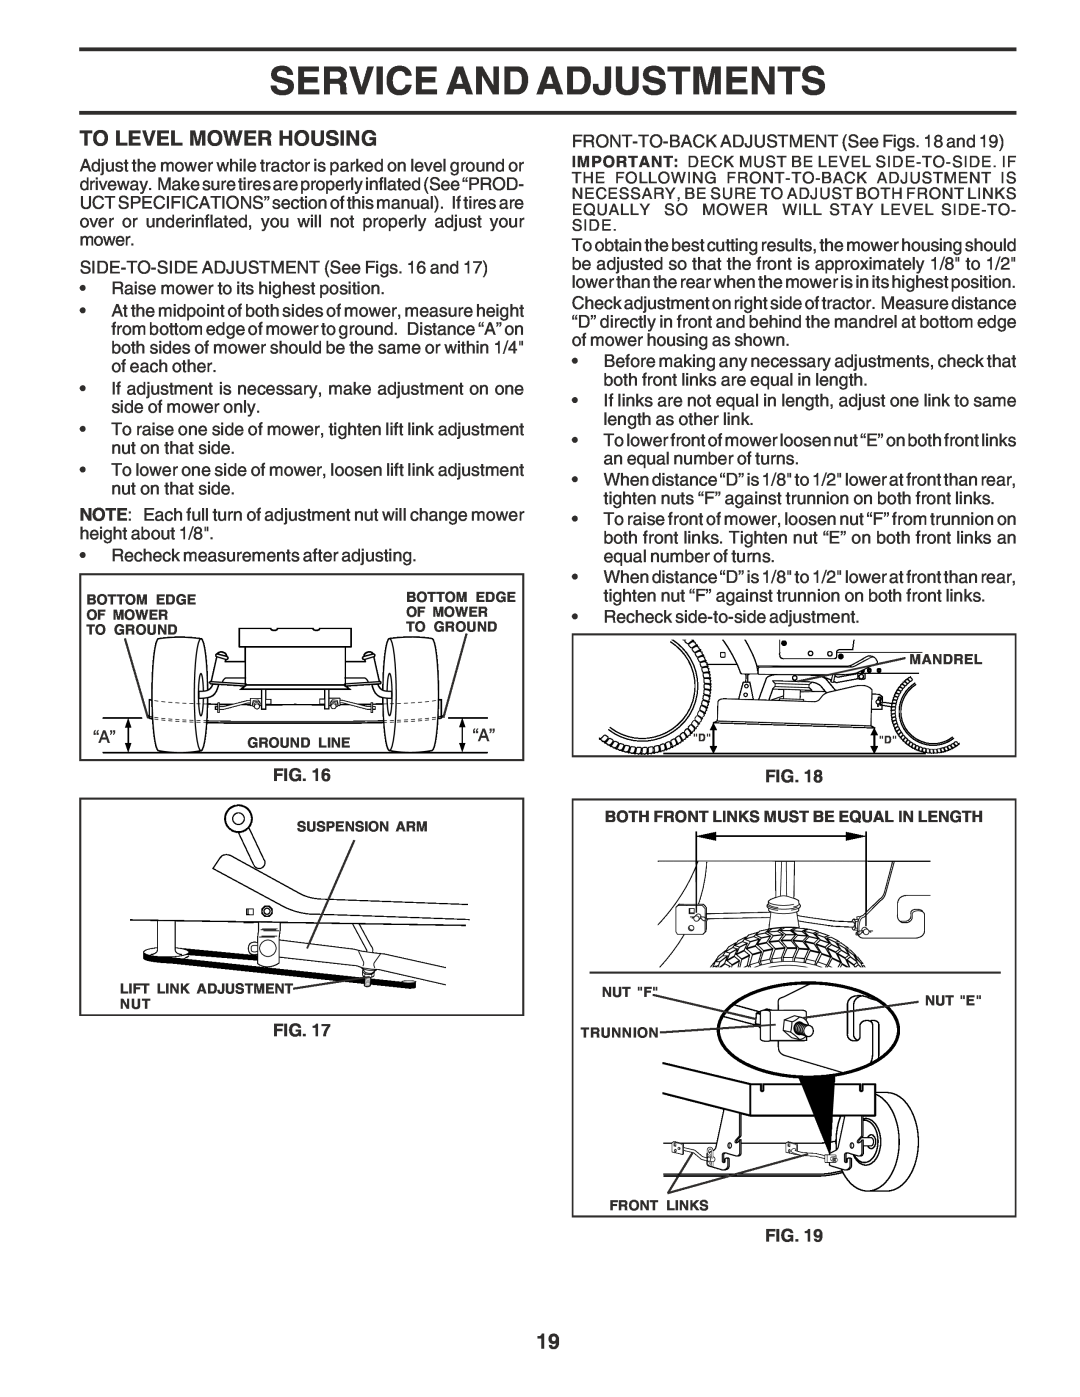 Poulan 180196 owner manual To Level Mower Housing, Service And Adjustments 